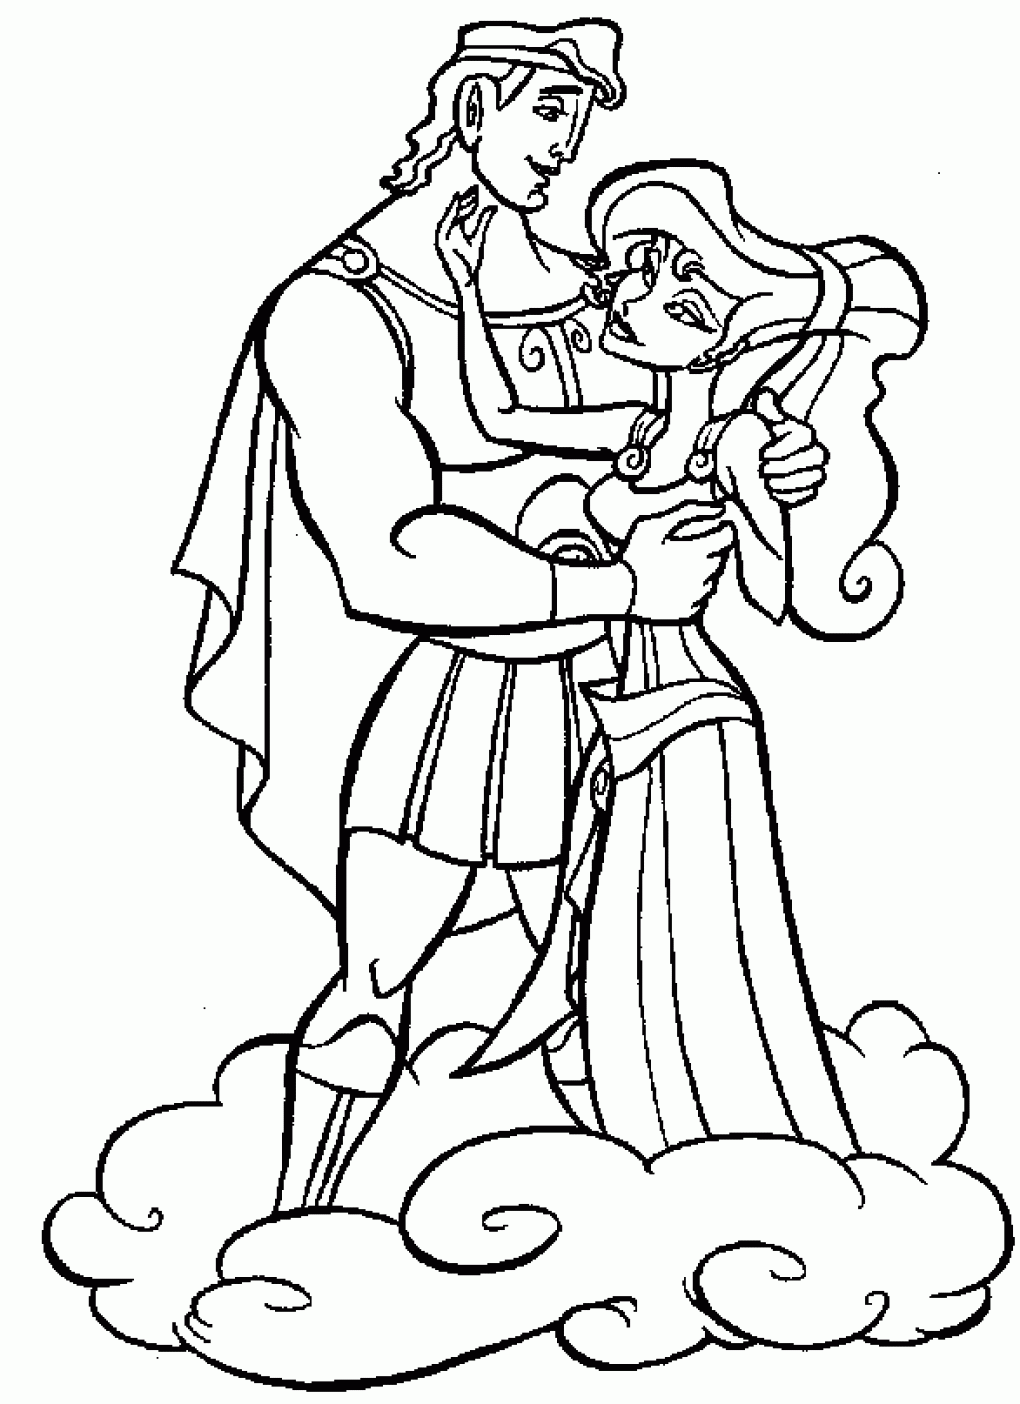 Free Printable Hercules Coloring Pages For Kids BEDECOR Free Coloring Picture wallpaper give a chance to color on the wall without getting in trouble! Fill the walls of your home or office with stress-relieving [bedroomdecorz.blogspot.com]